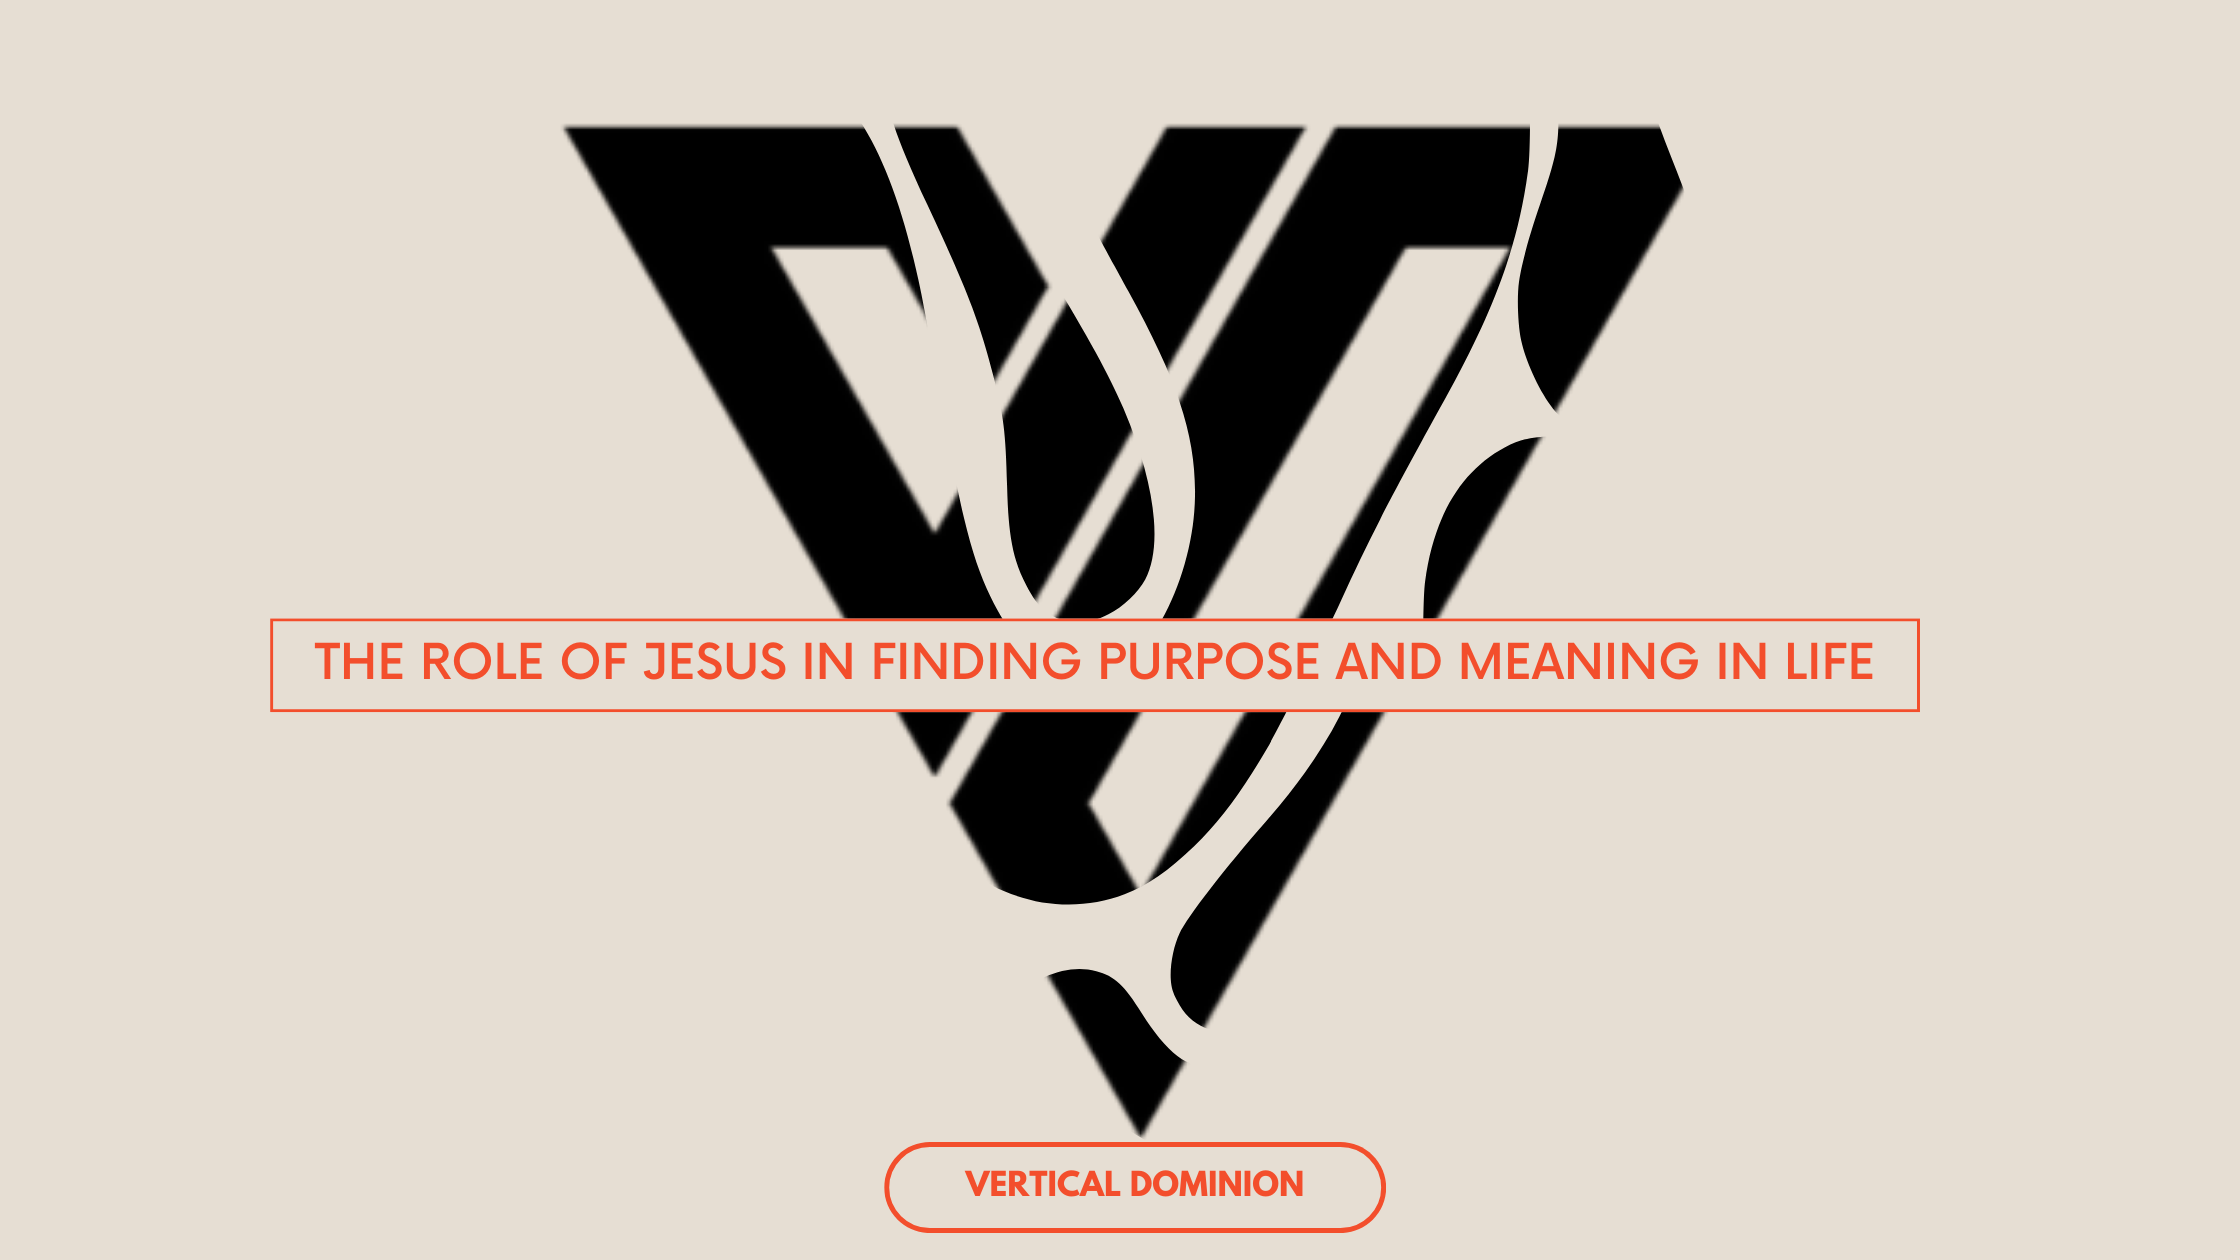 The Role of Jesus in Finding Purpose and Meaning in Life